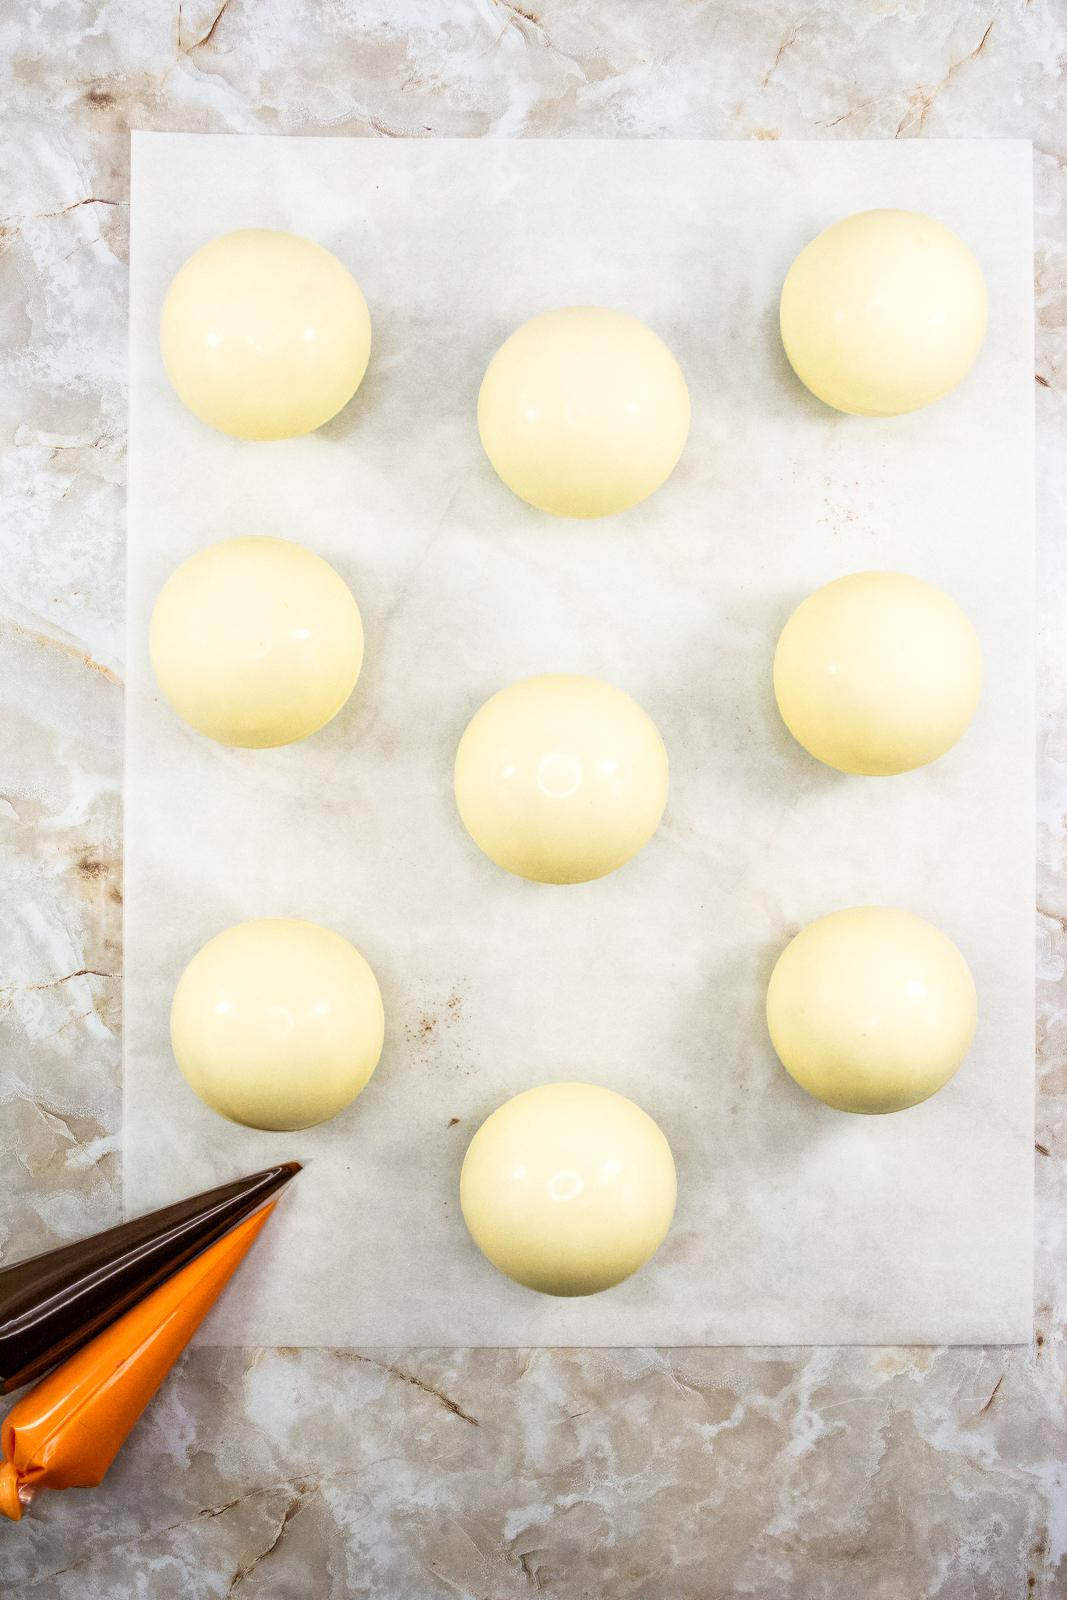 Nine white chocolate cocoa bombs waiting to be decorated on parchment paper.